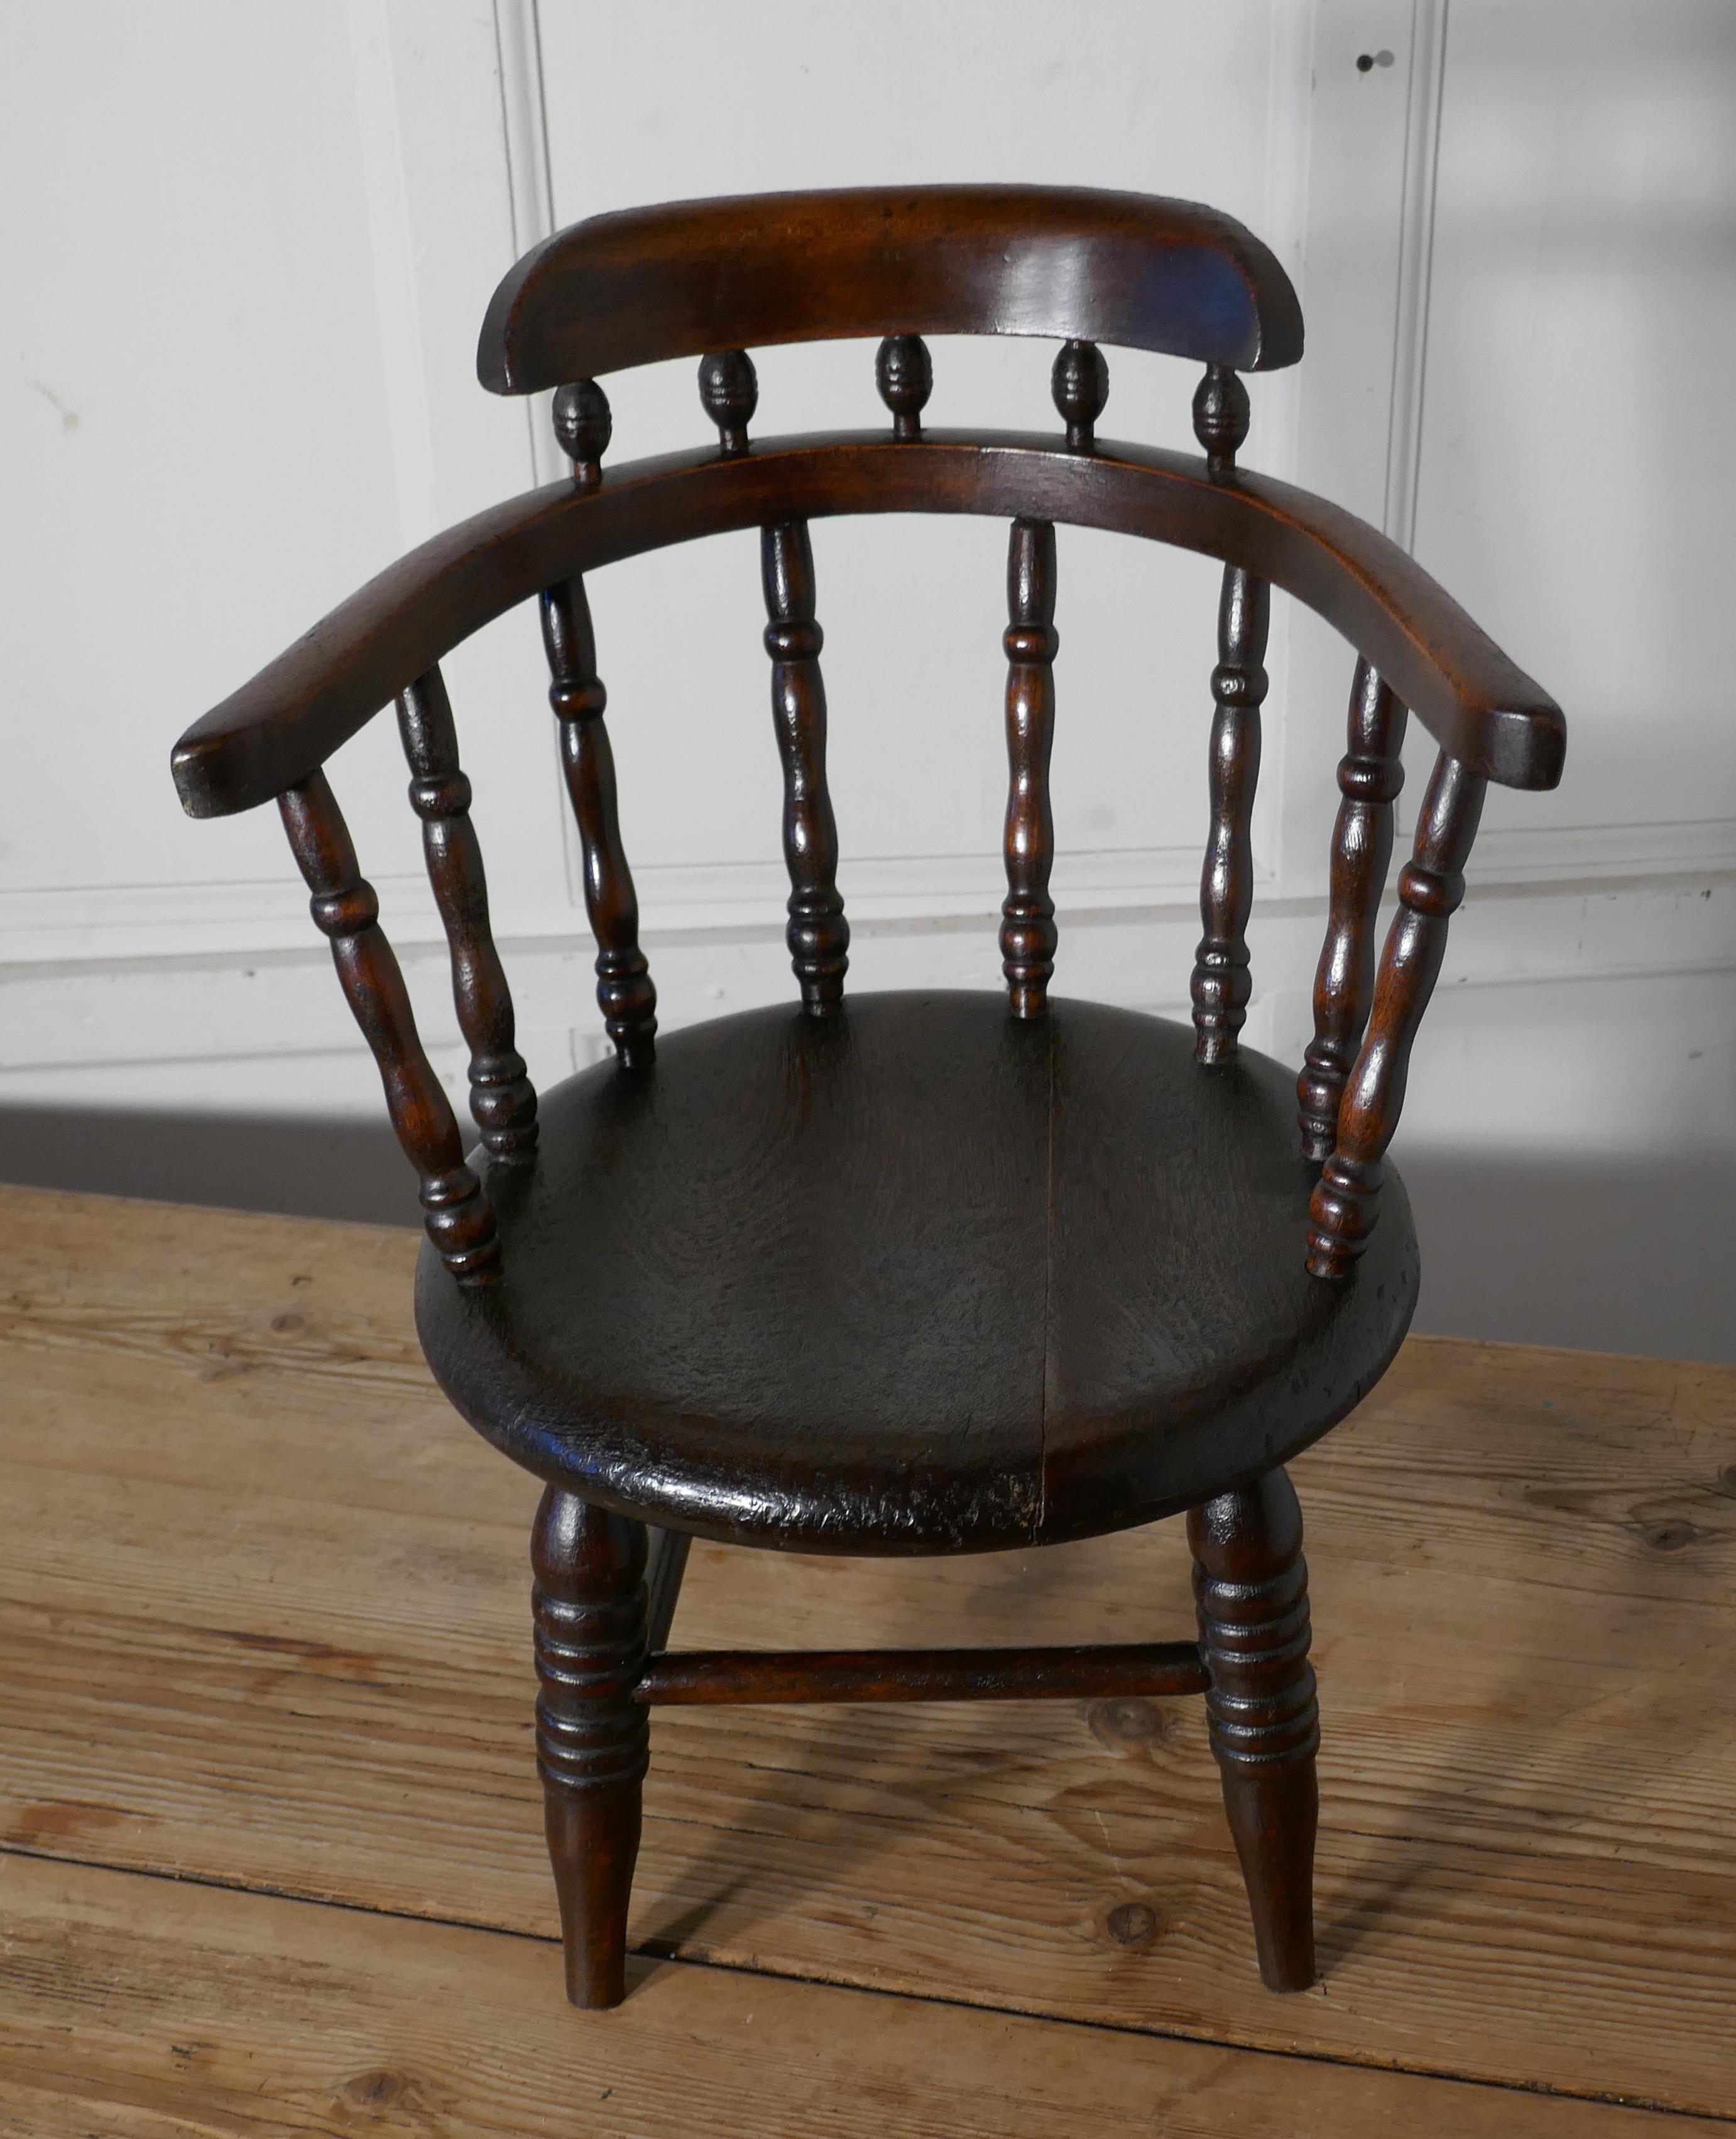 Childs chair, in the style of a Captain’s chair

This is a very unusual child’s chair, the chair has a rounded spindle back with which curves around to form the arms in the style of a smokers bow or Captains chair with a thick round elm seat
This